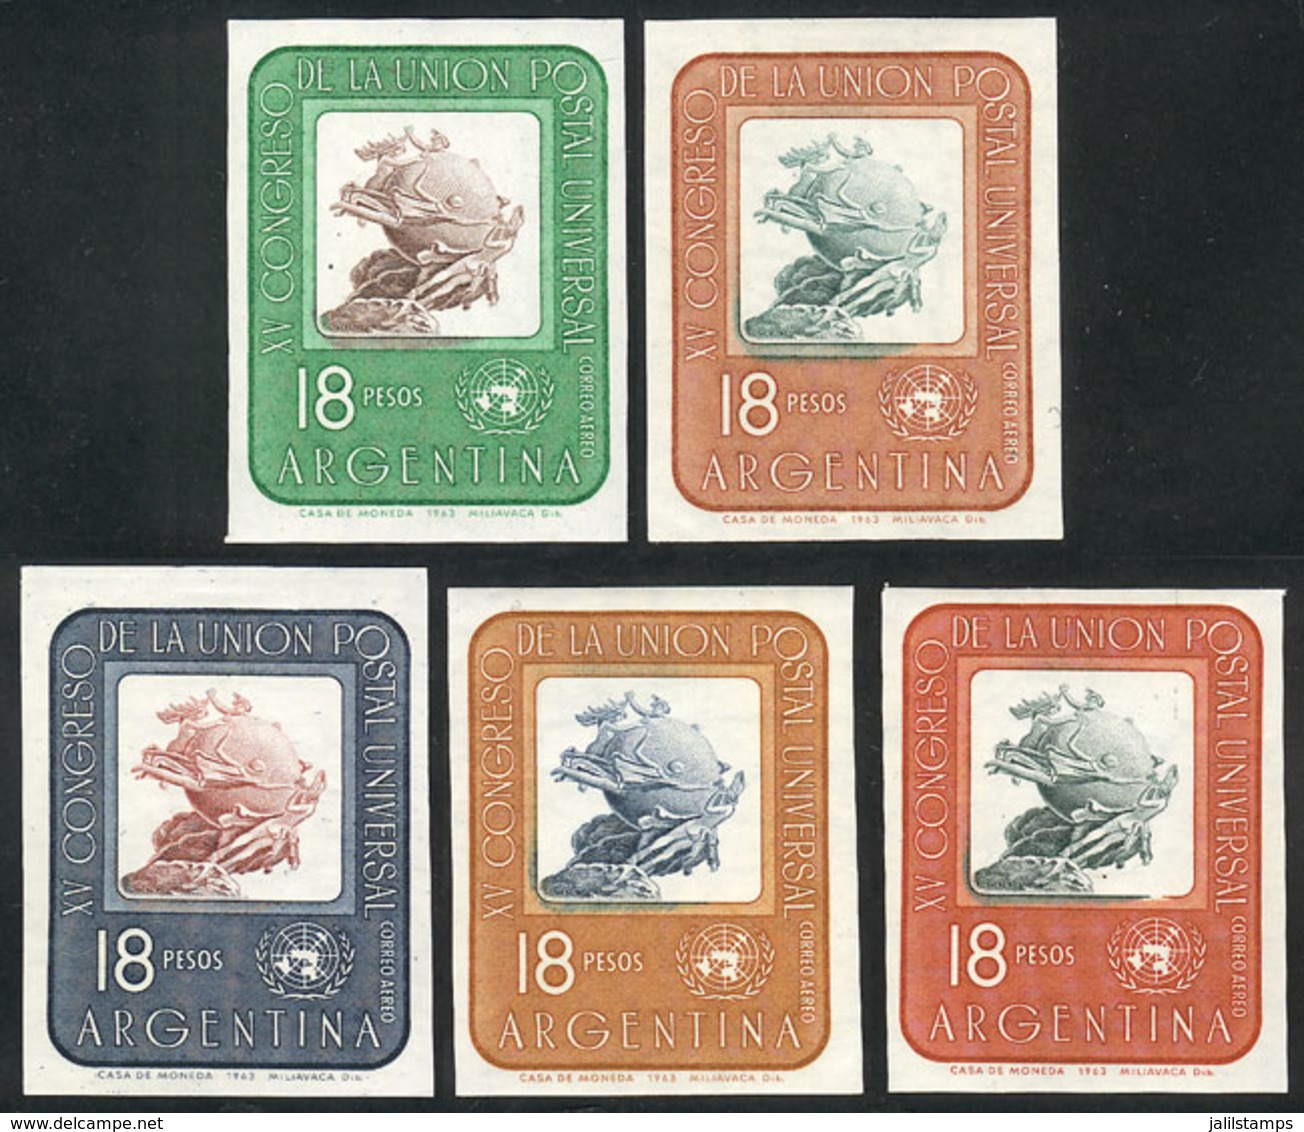 ARGENTINA: GJ.1278, 1964 UPU Congress, 5 Imperforate TRIAL COLOR PROOFS, Printed On Gummed Paper With Watermark, VF Qual - Airmail